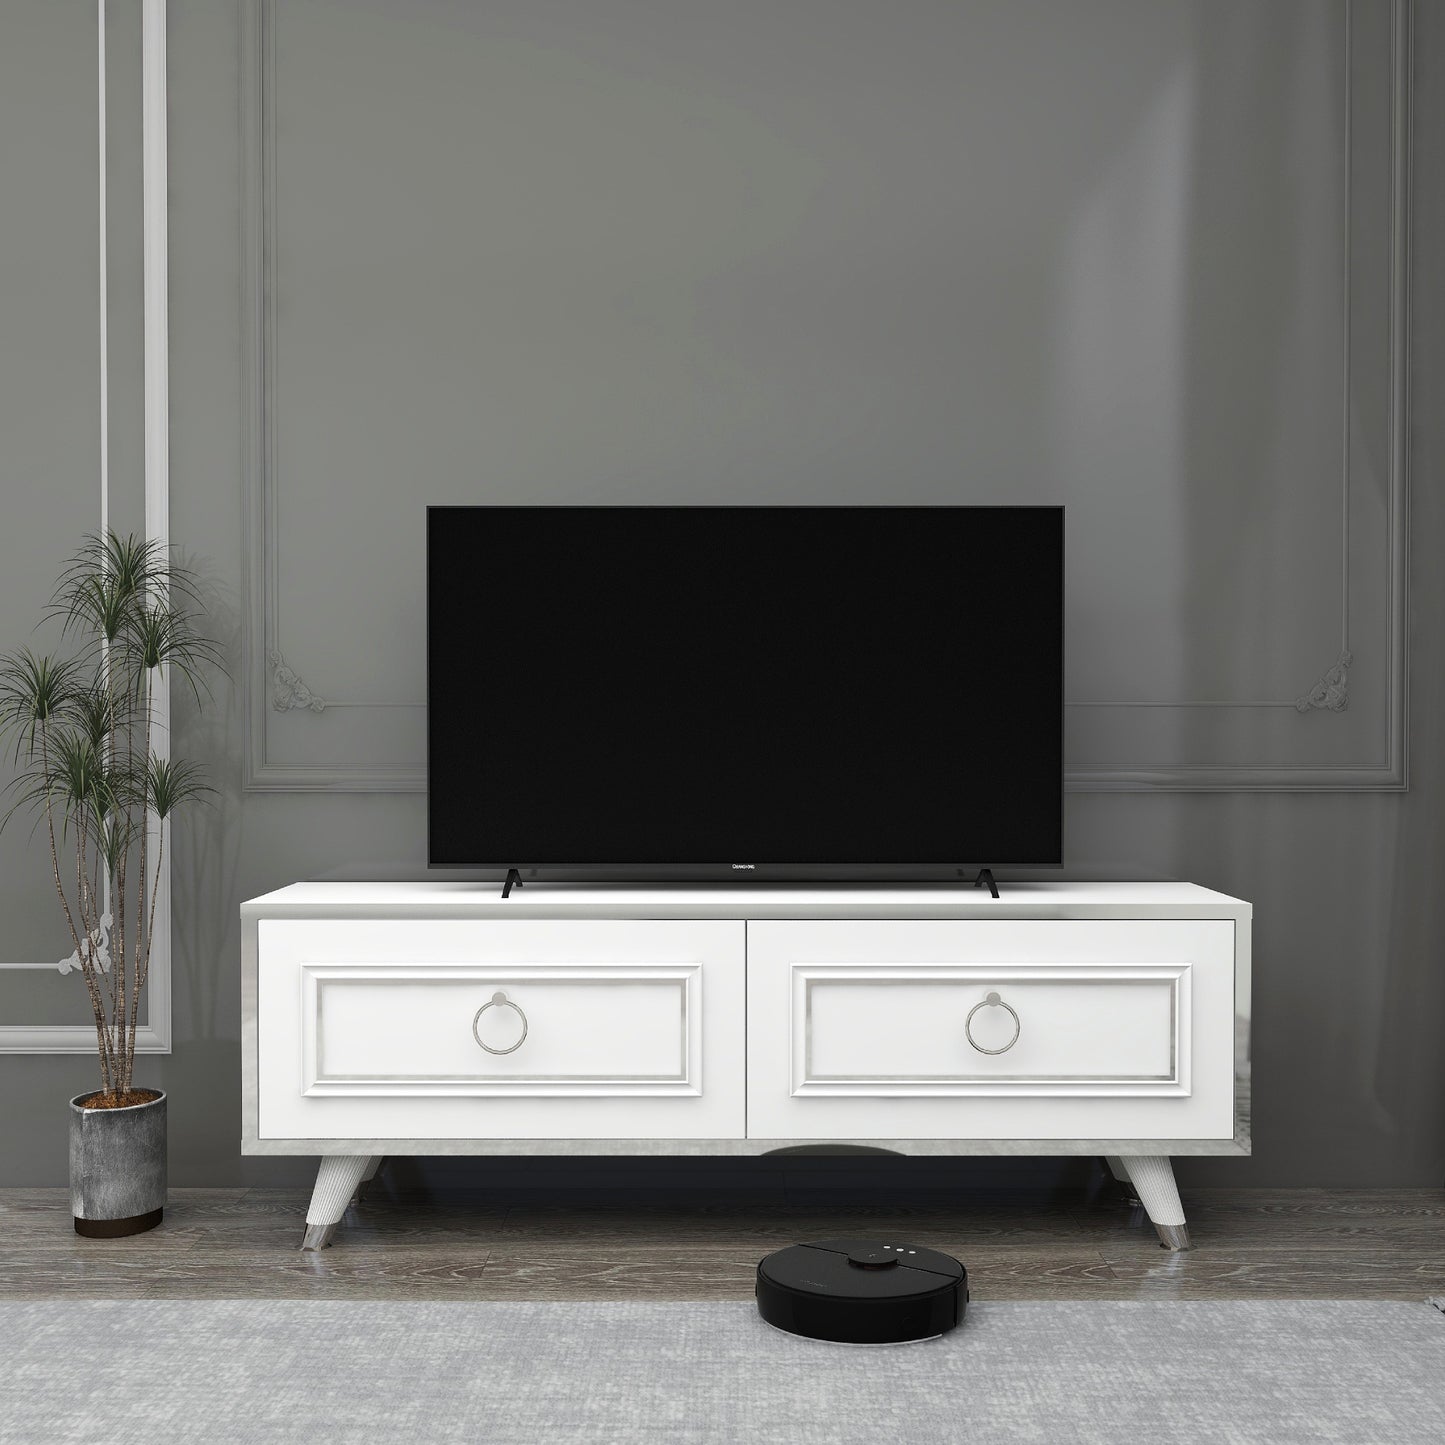 Esmera 120 cm Wide TV Stand and Media Console with Cabinets